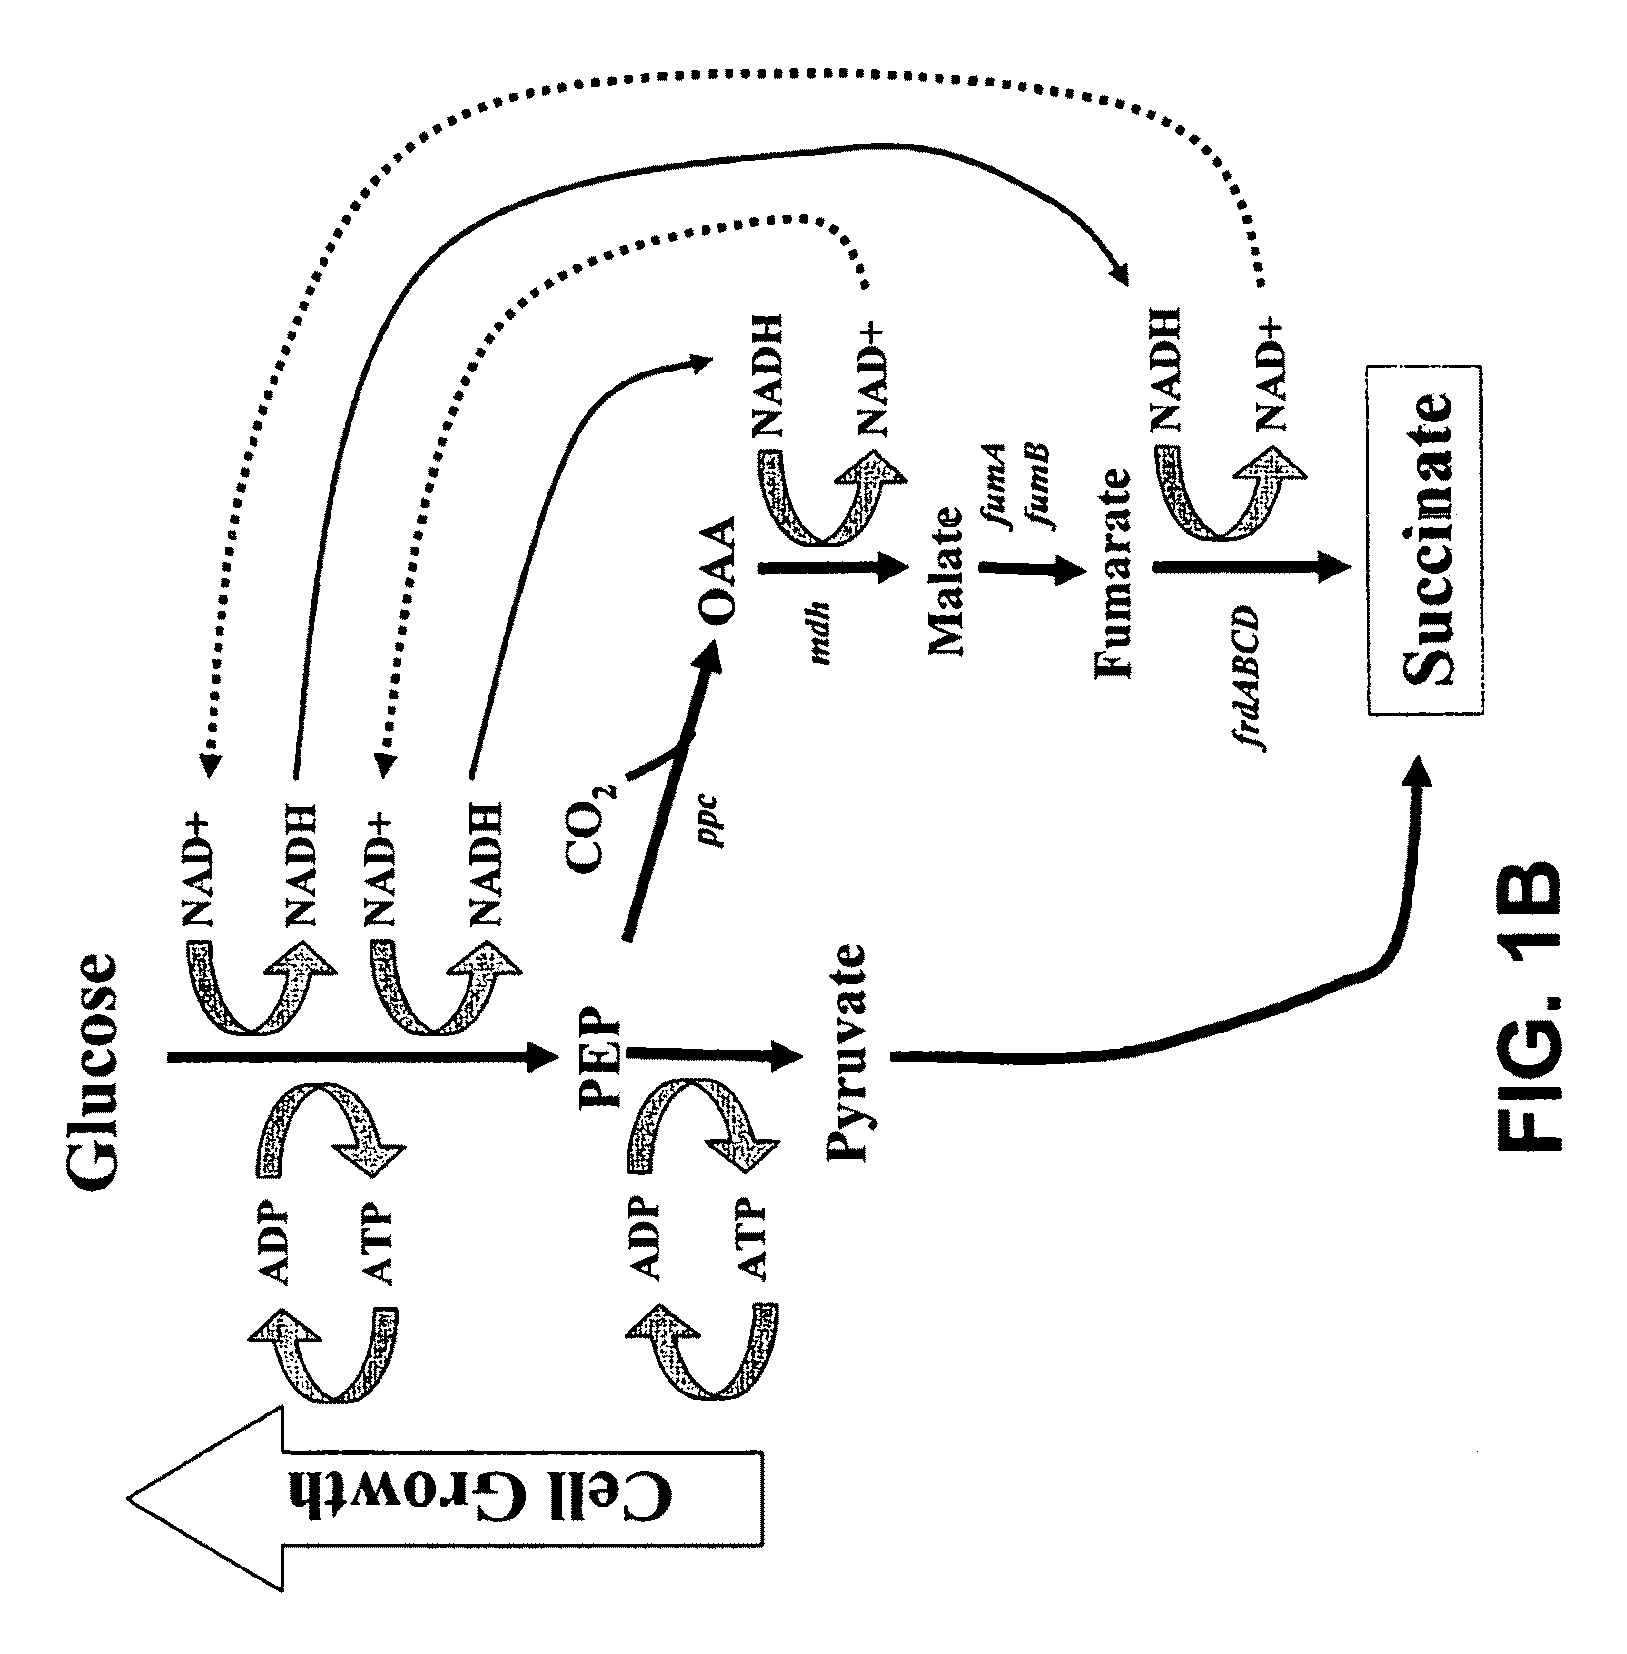 Materials and Methods for Efficient Succinate and Malate Production